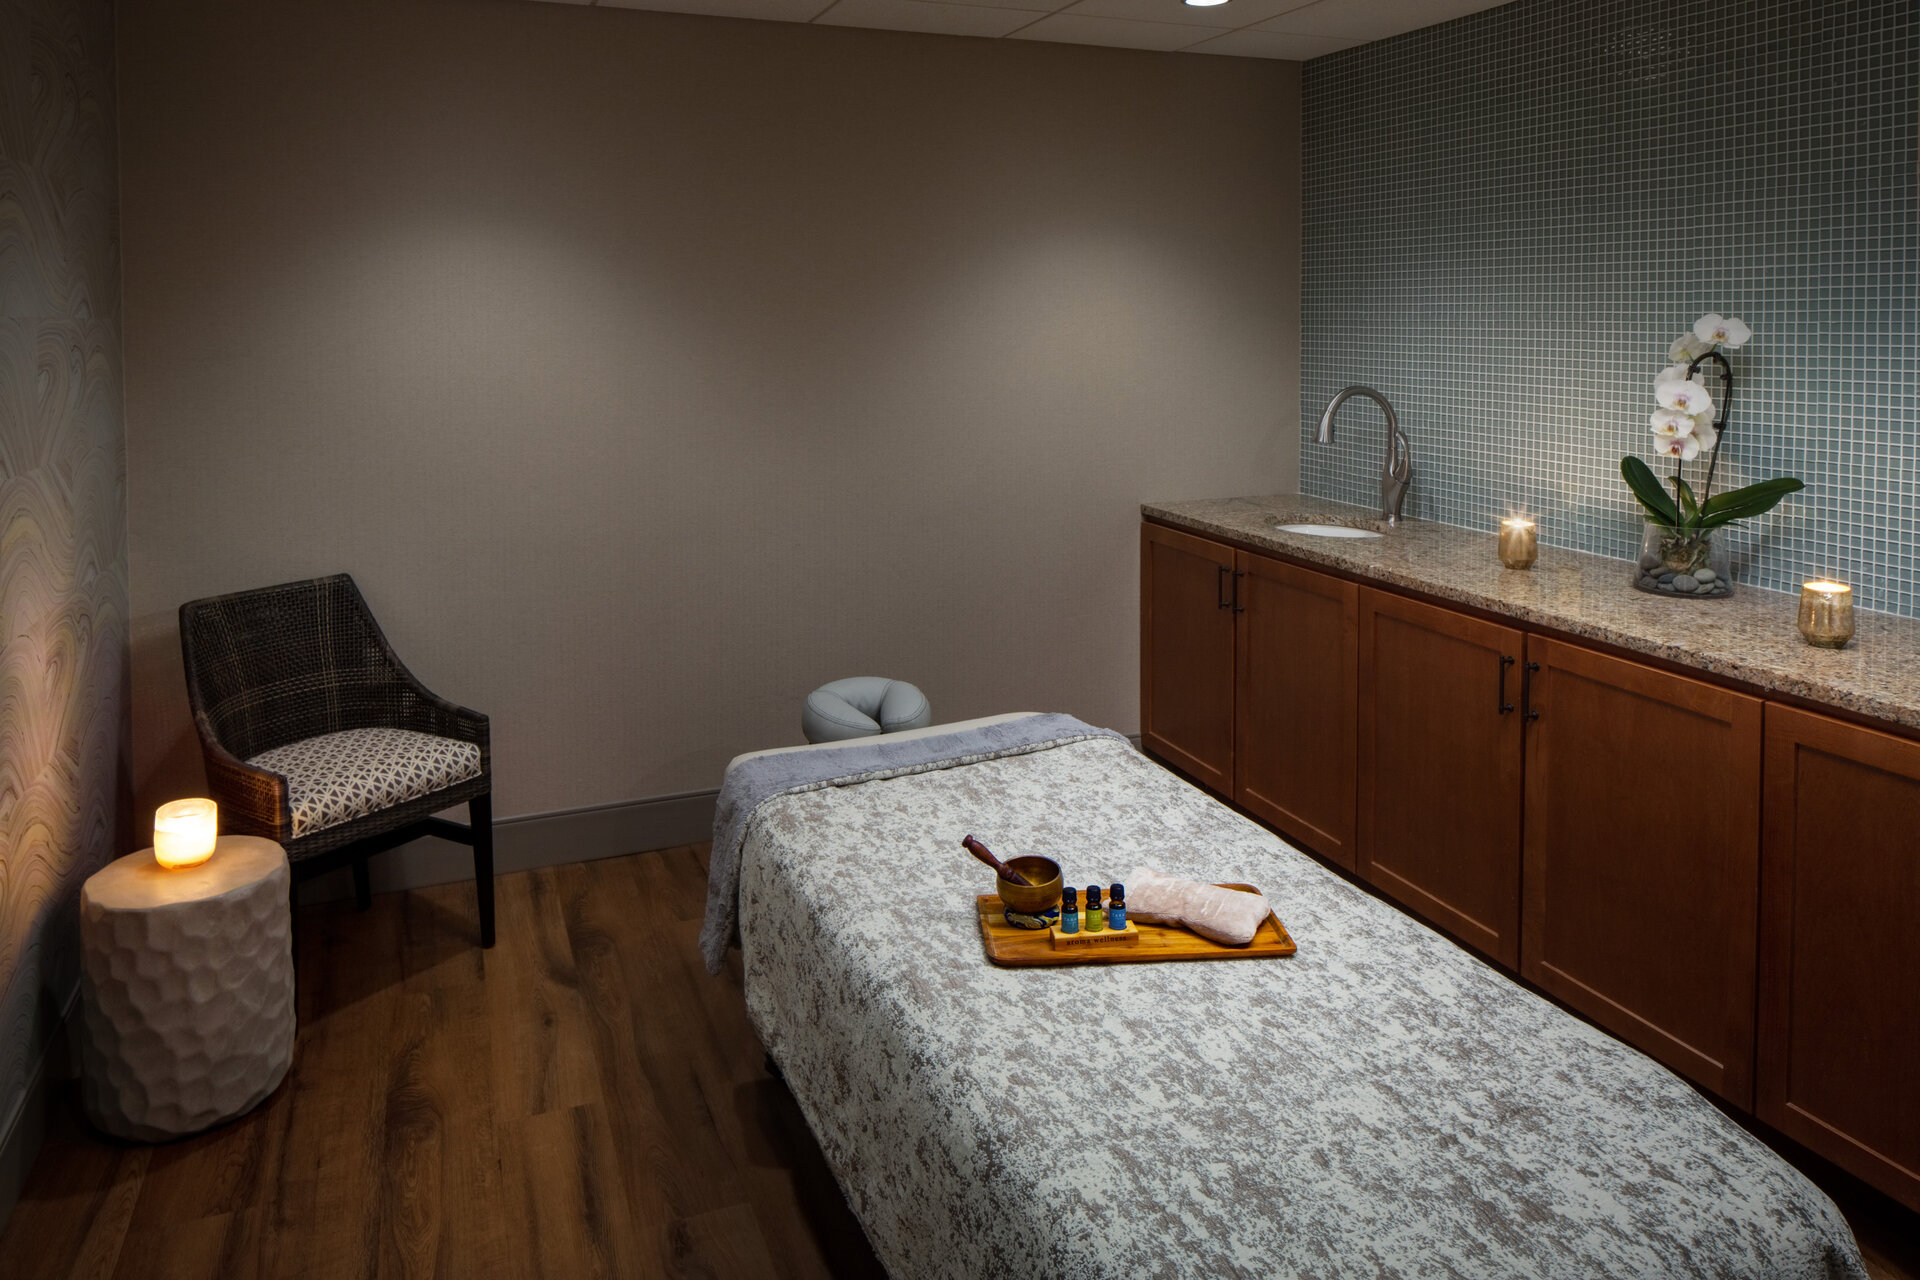 Spa Treatment Room at The Elms